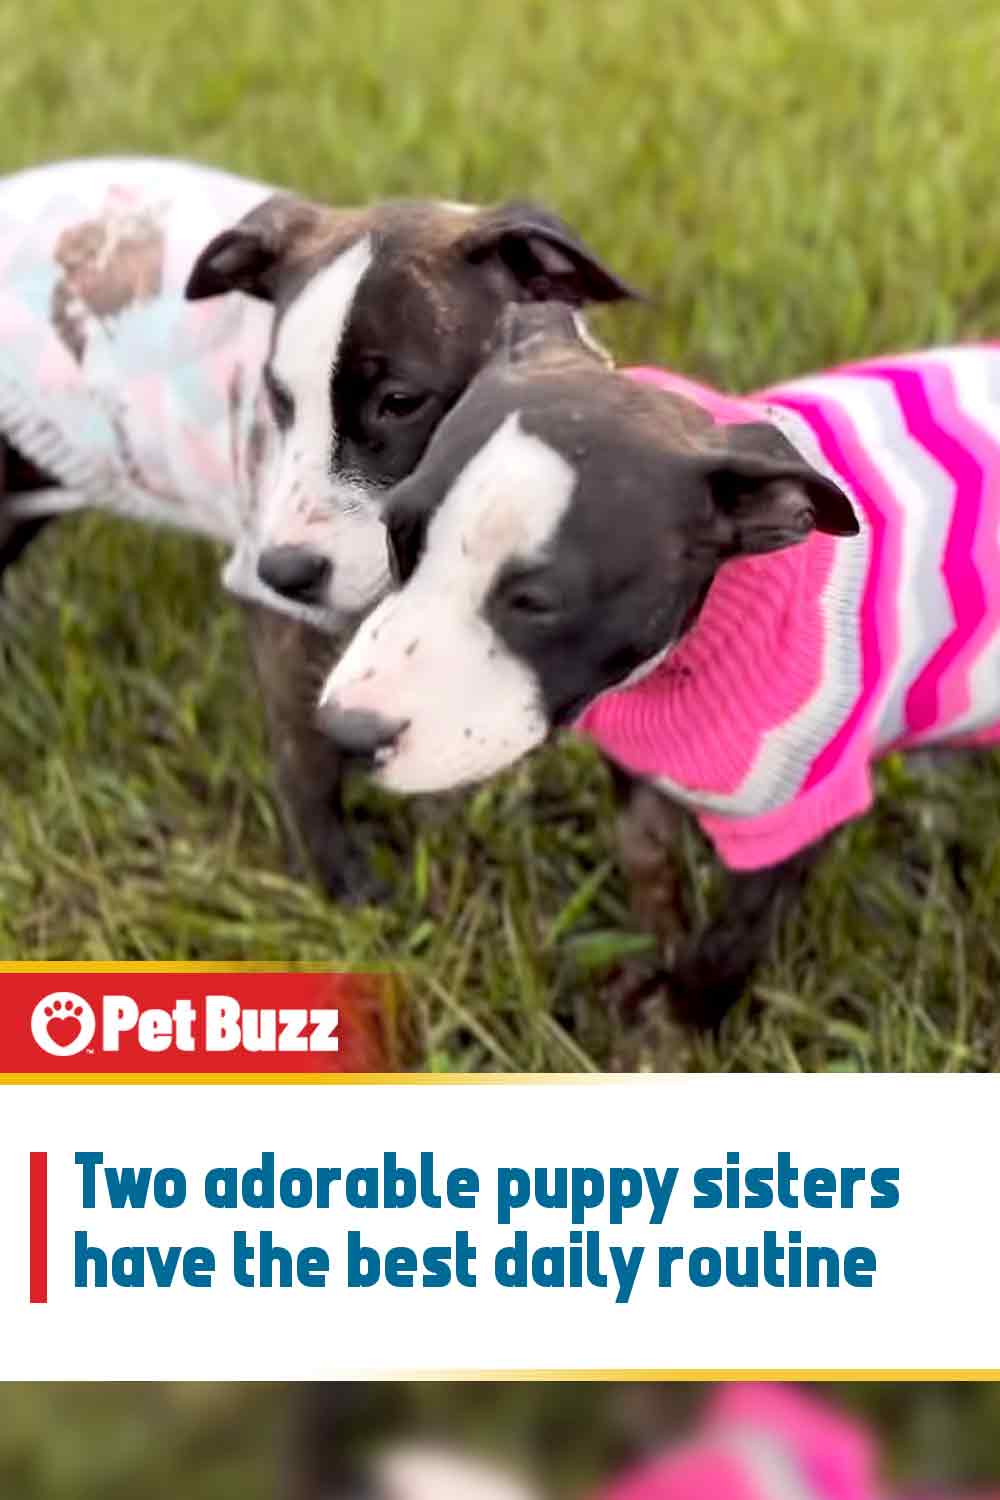 Two adorable puppy sisters have the best daily routine